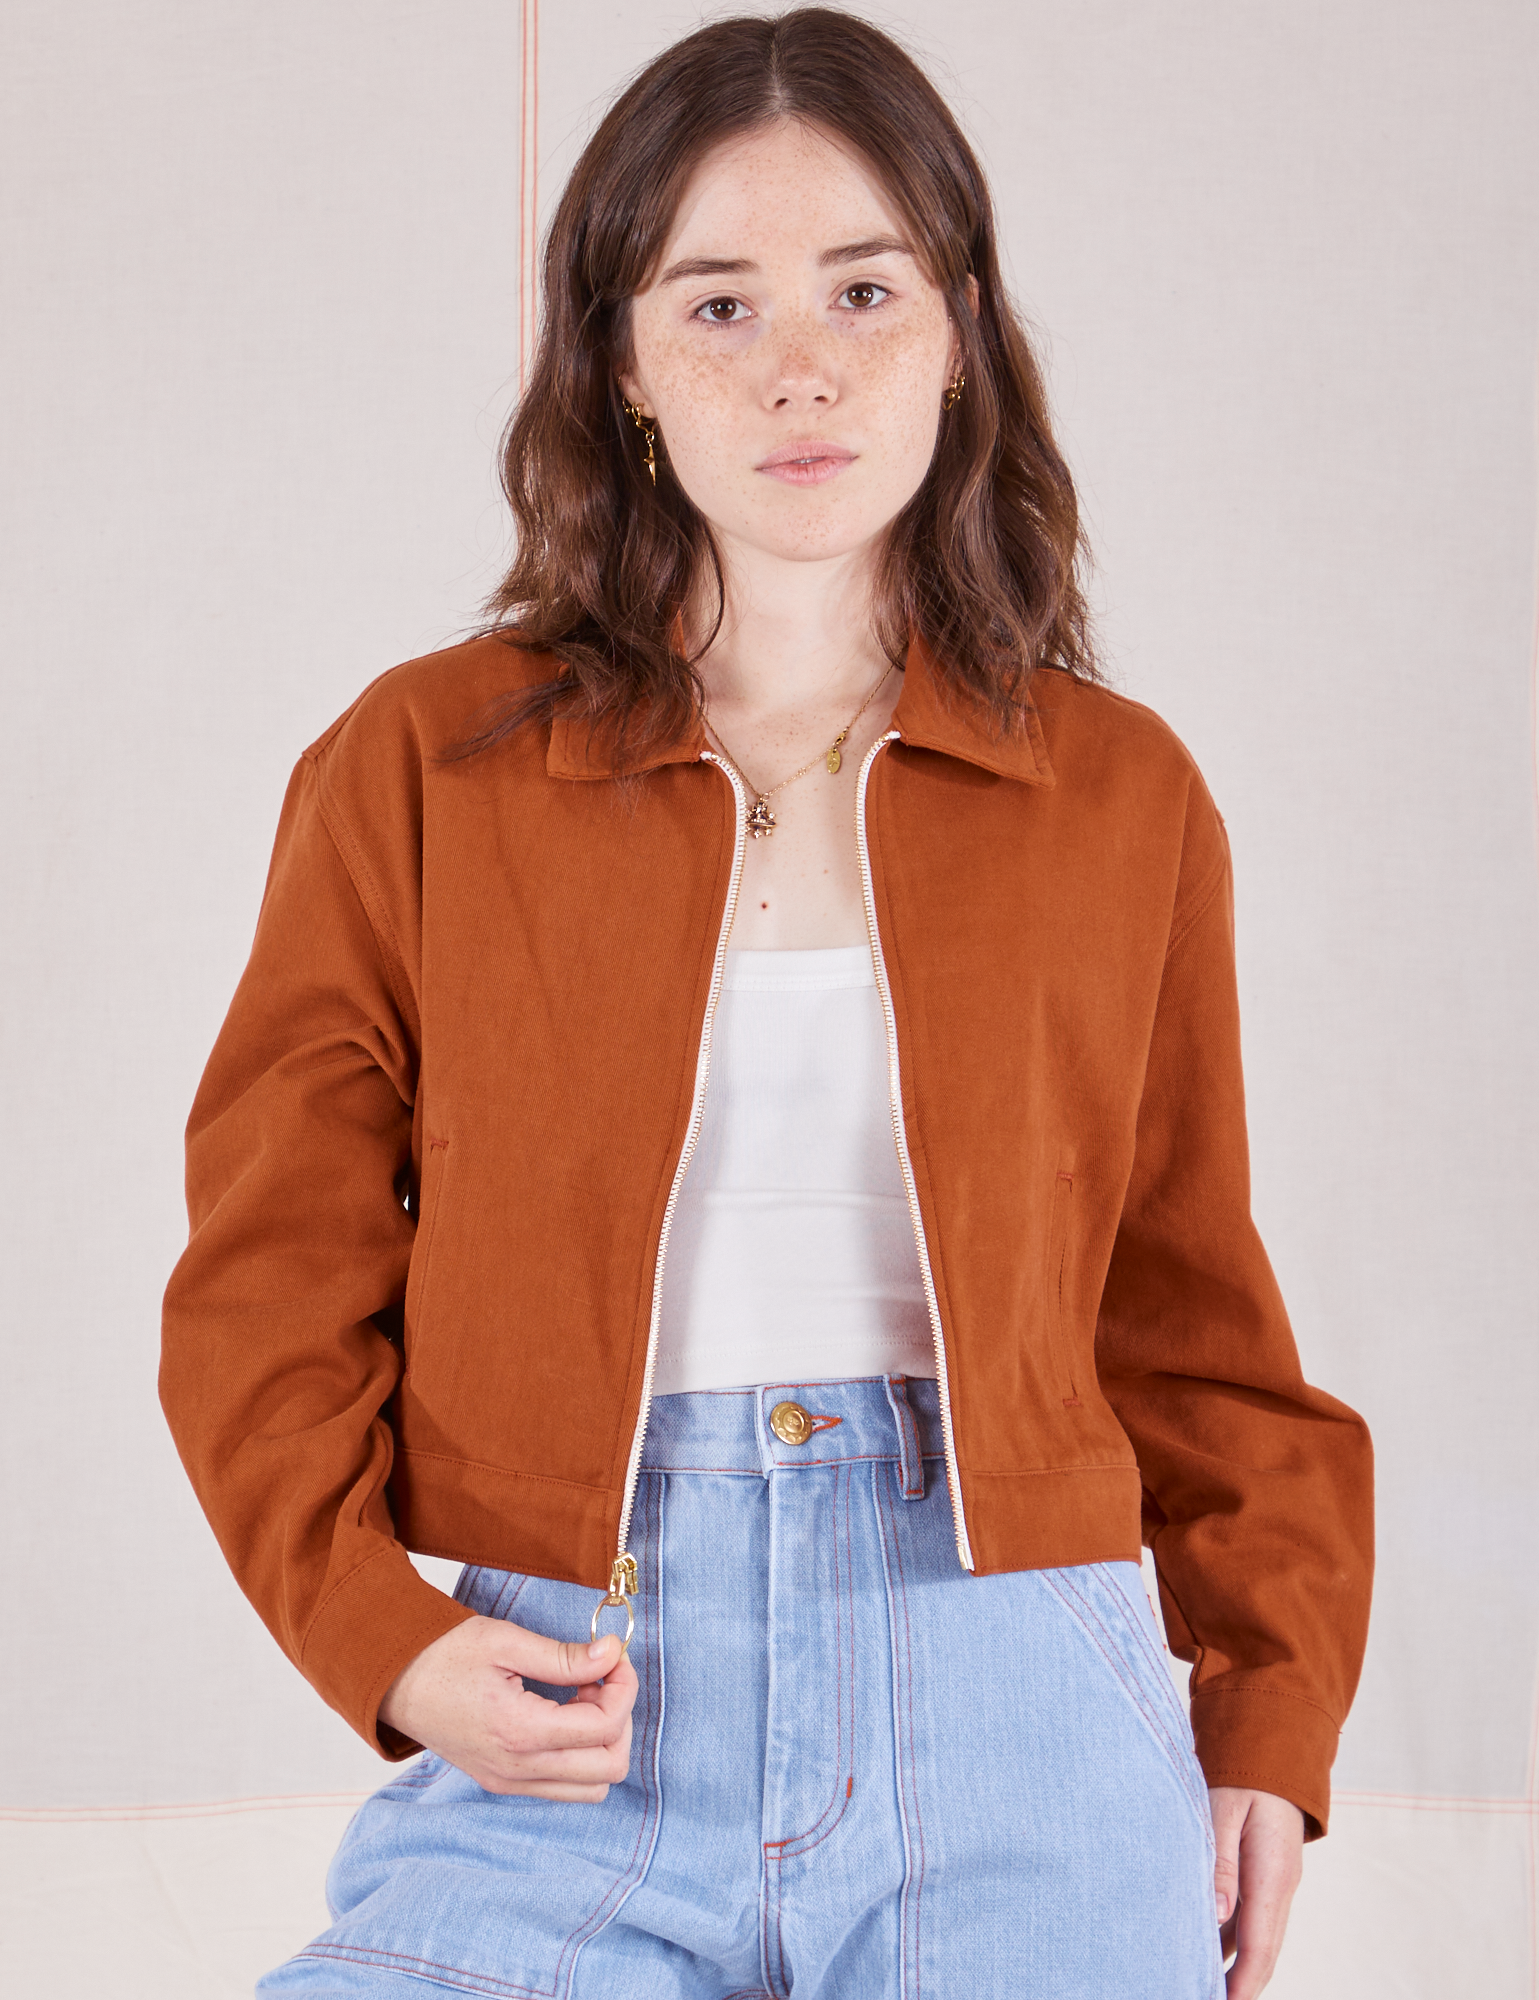 Hana is 5’3” and wearing P Ricky Jacket in Burnt Terracotta